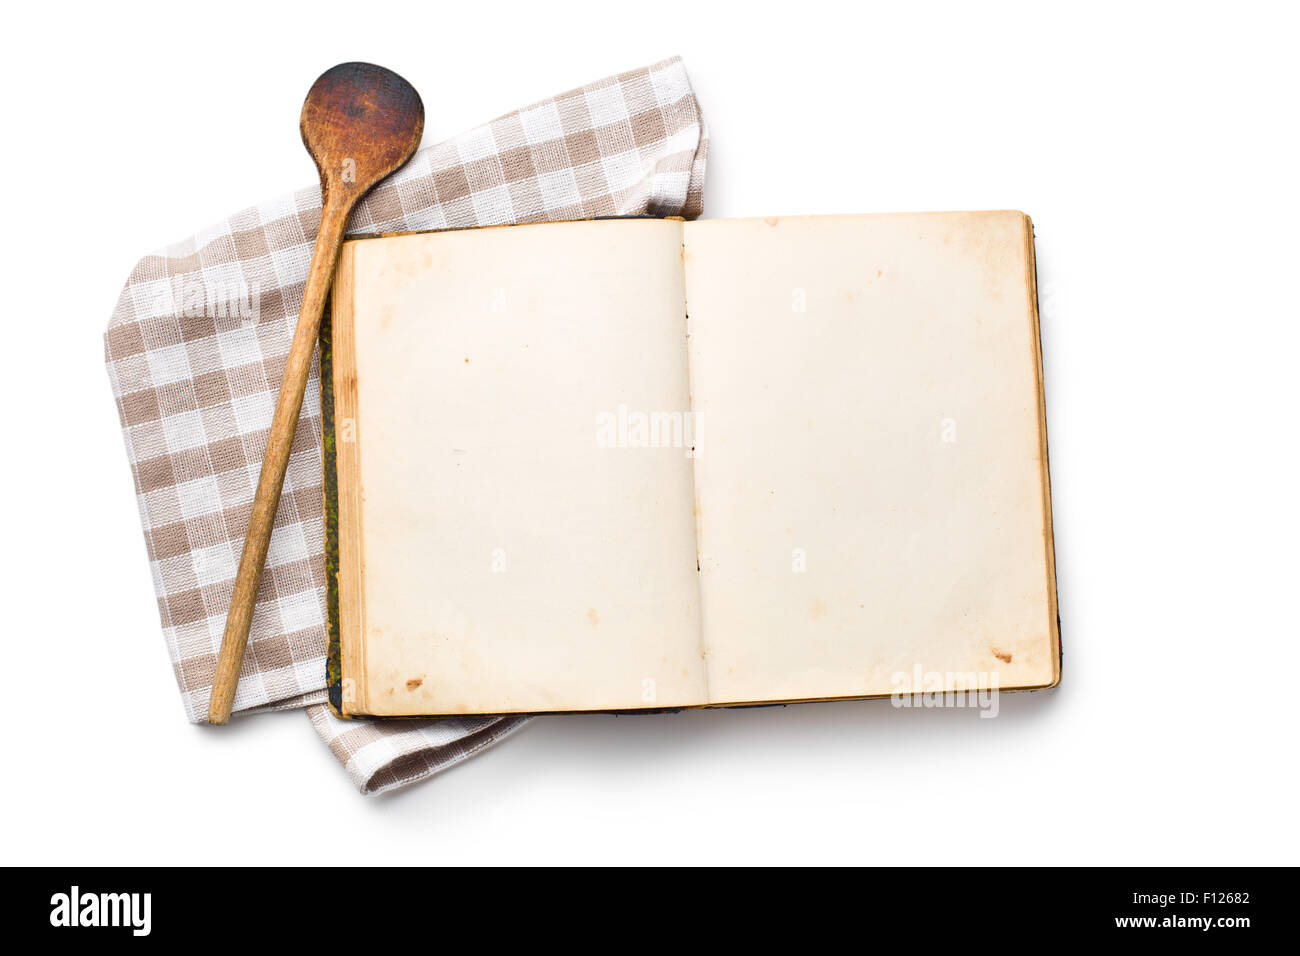 Vintage Blank Cookbook And Mediterranean Food Stock Photo, Picture